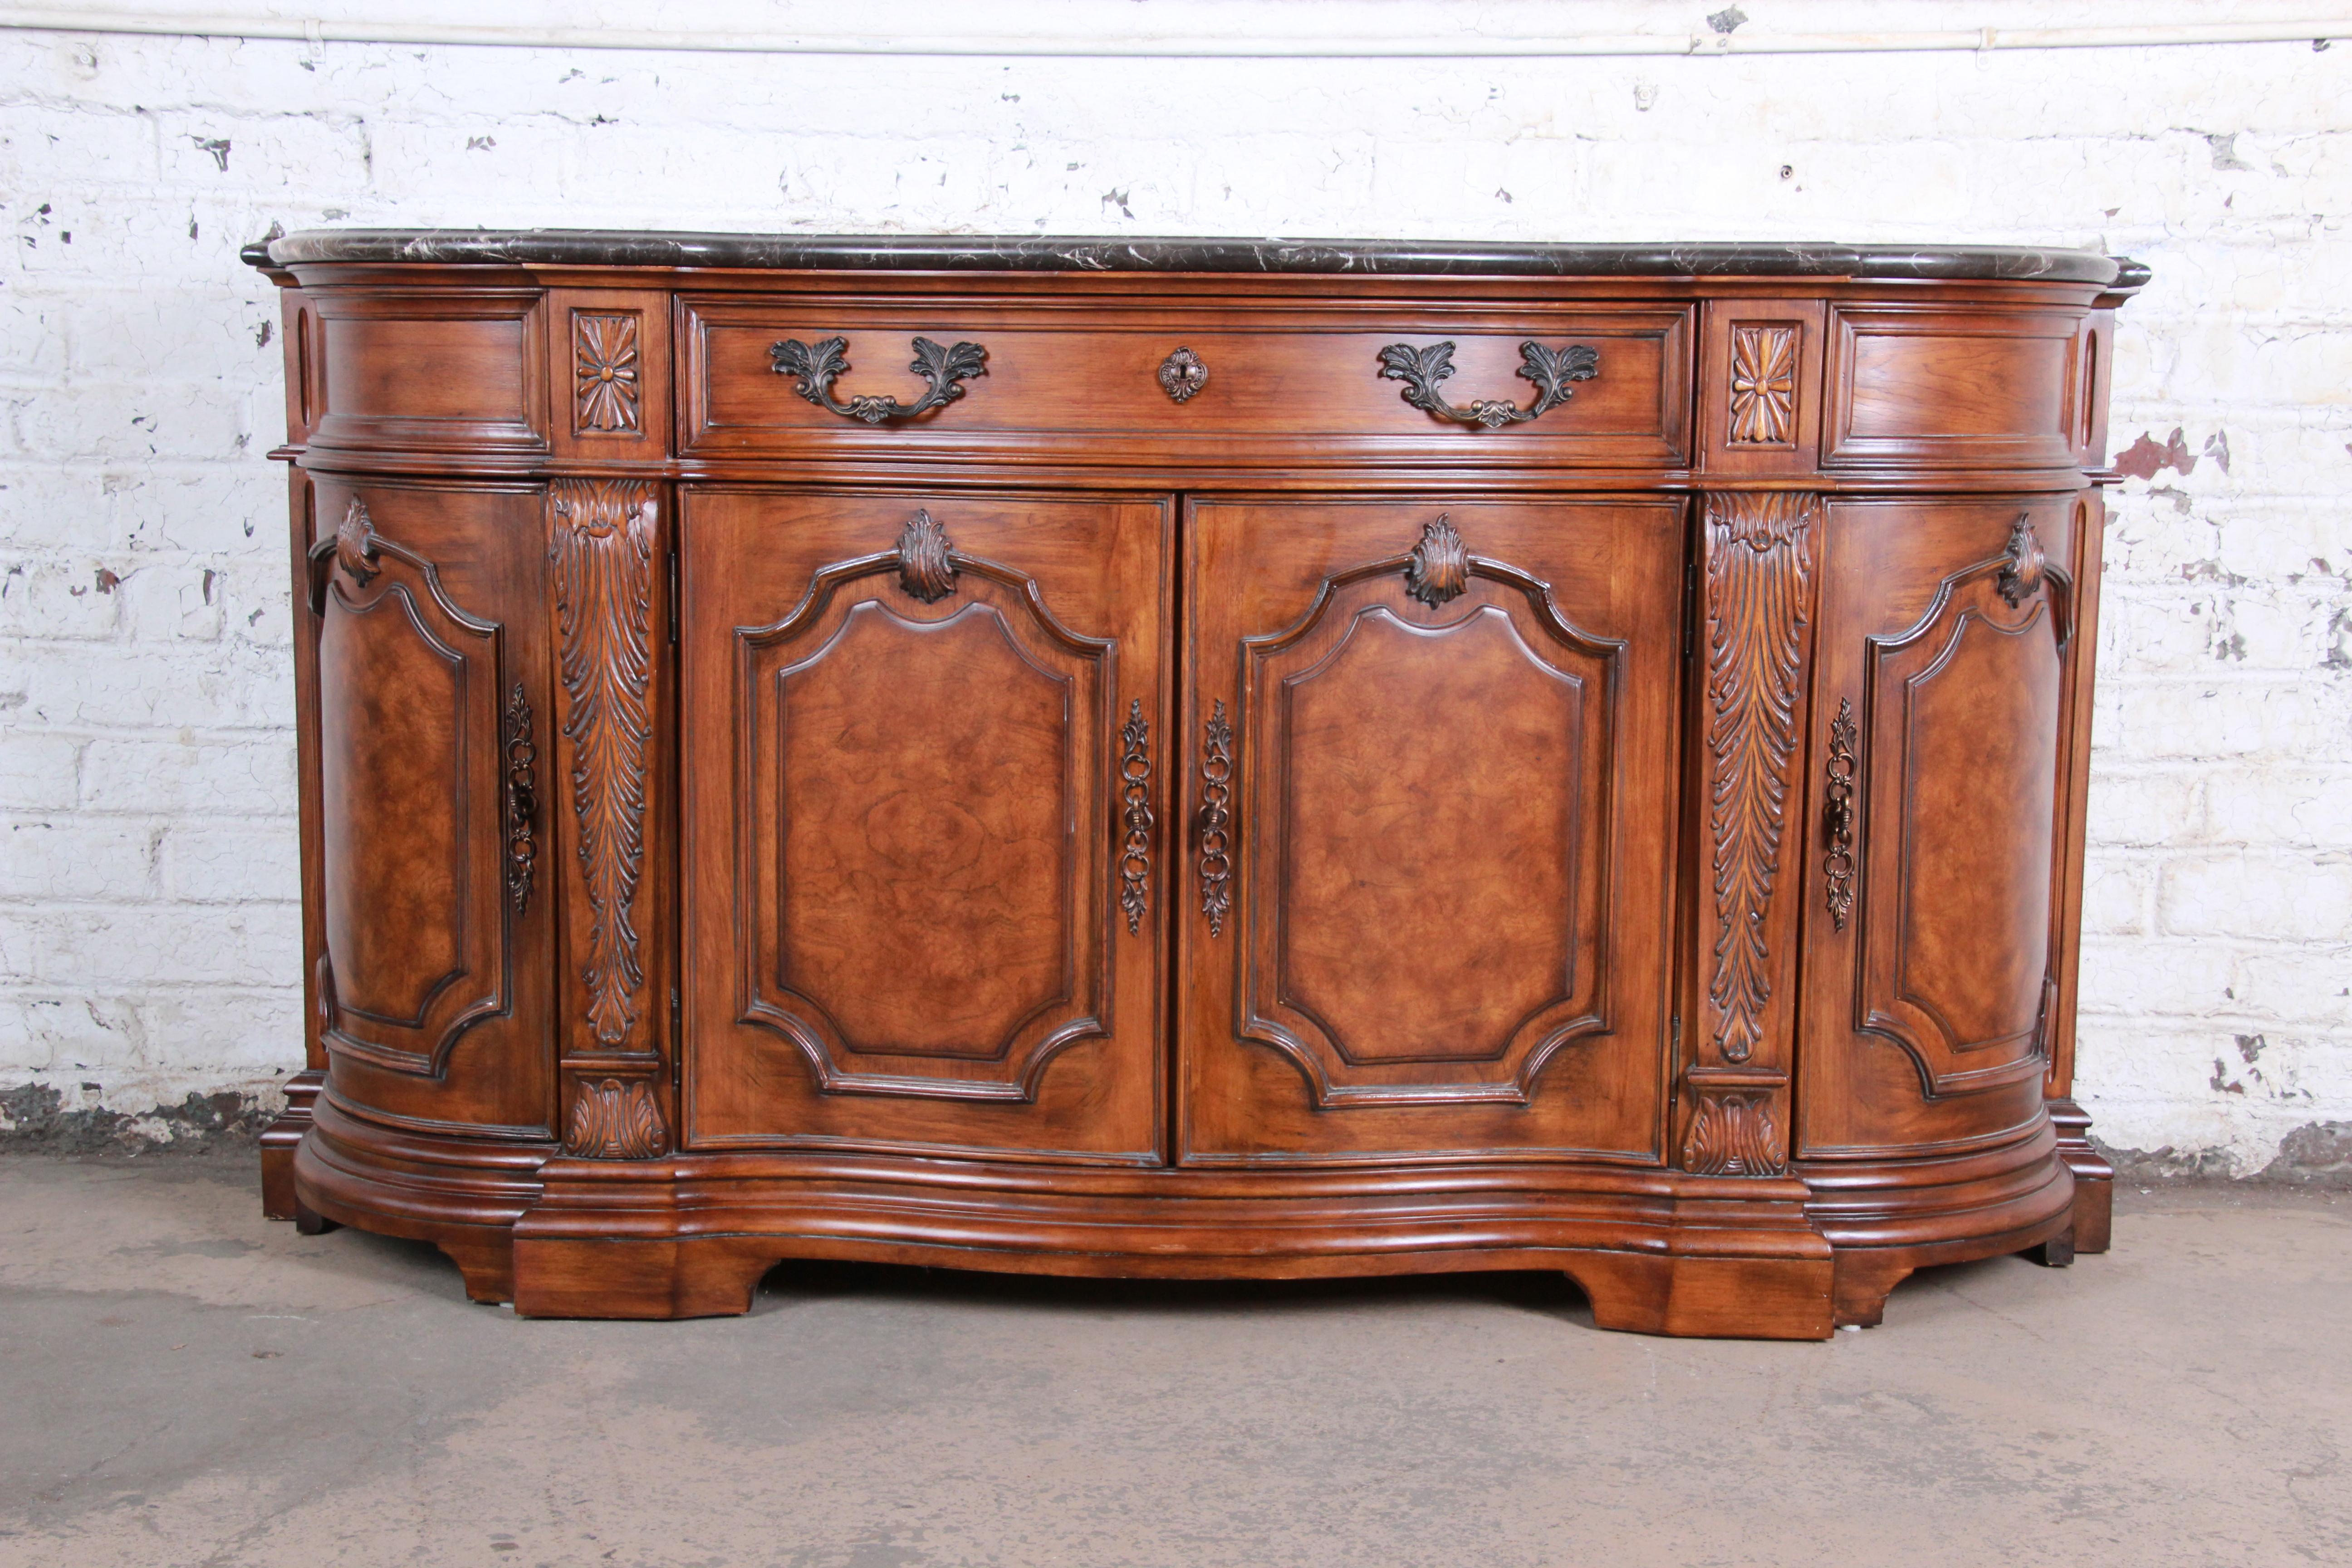 An outstanding French carved marble-top sideboard by Drexel Heritage. The sideboard features gorgeous burled walnut wood grain with nice carved wood details and a thick beveled black marble top with gray and white veining. It offers ample storage,